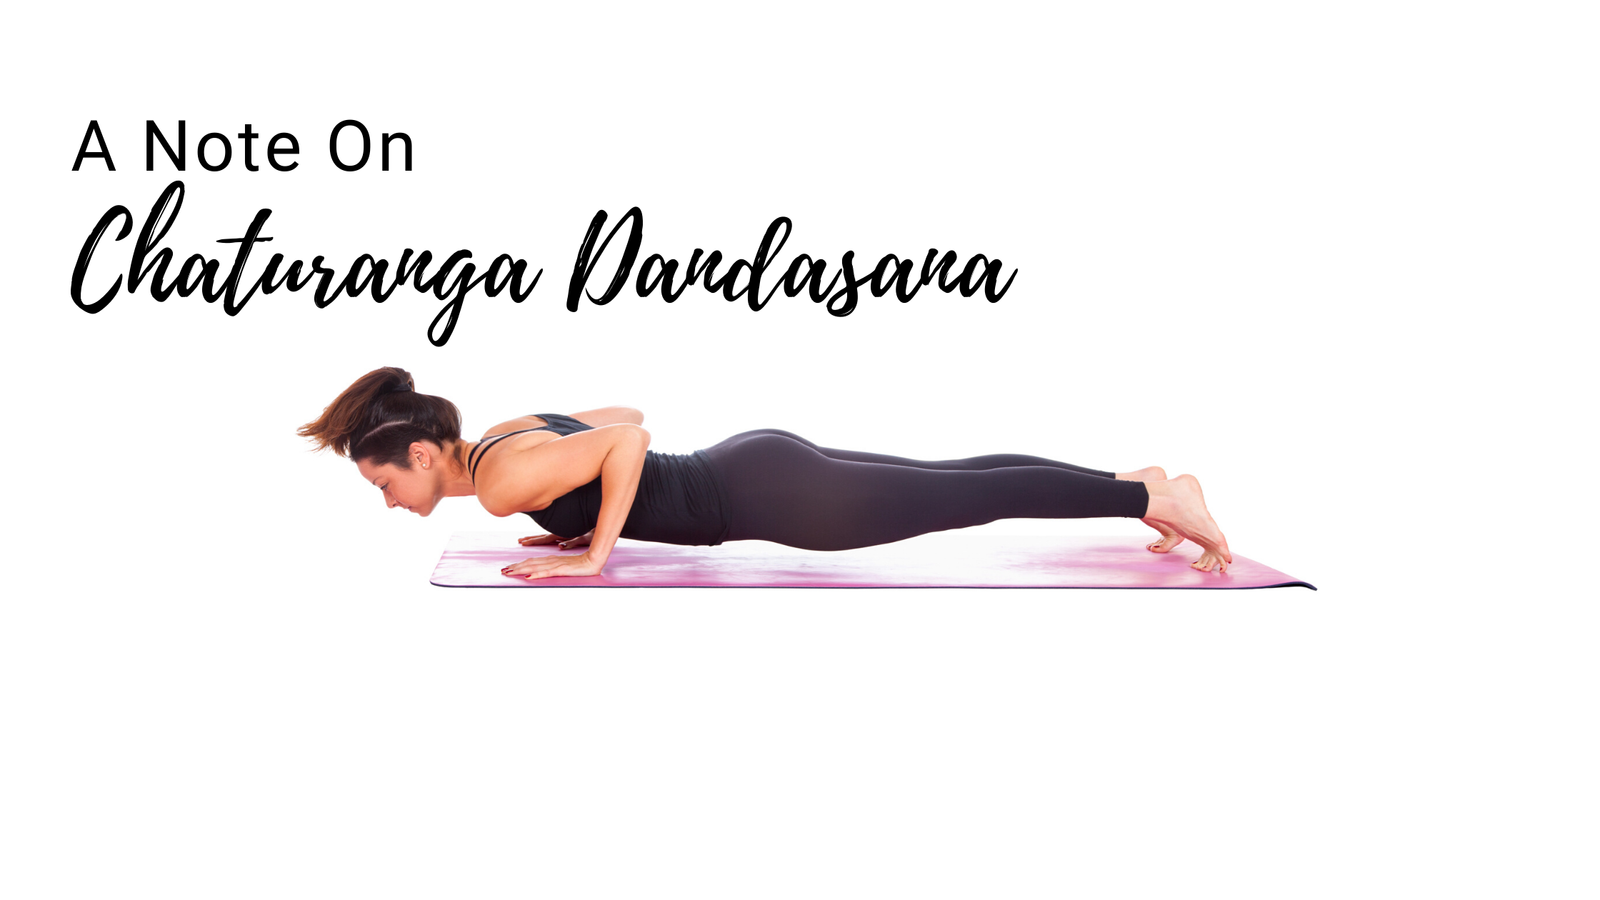 Build Strength for Chaturanga With These Four Progressive Poses